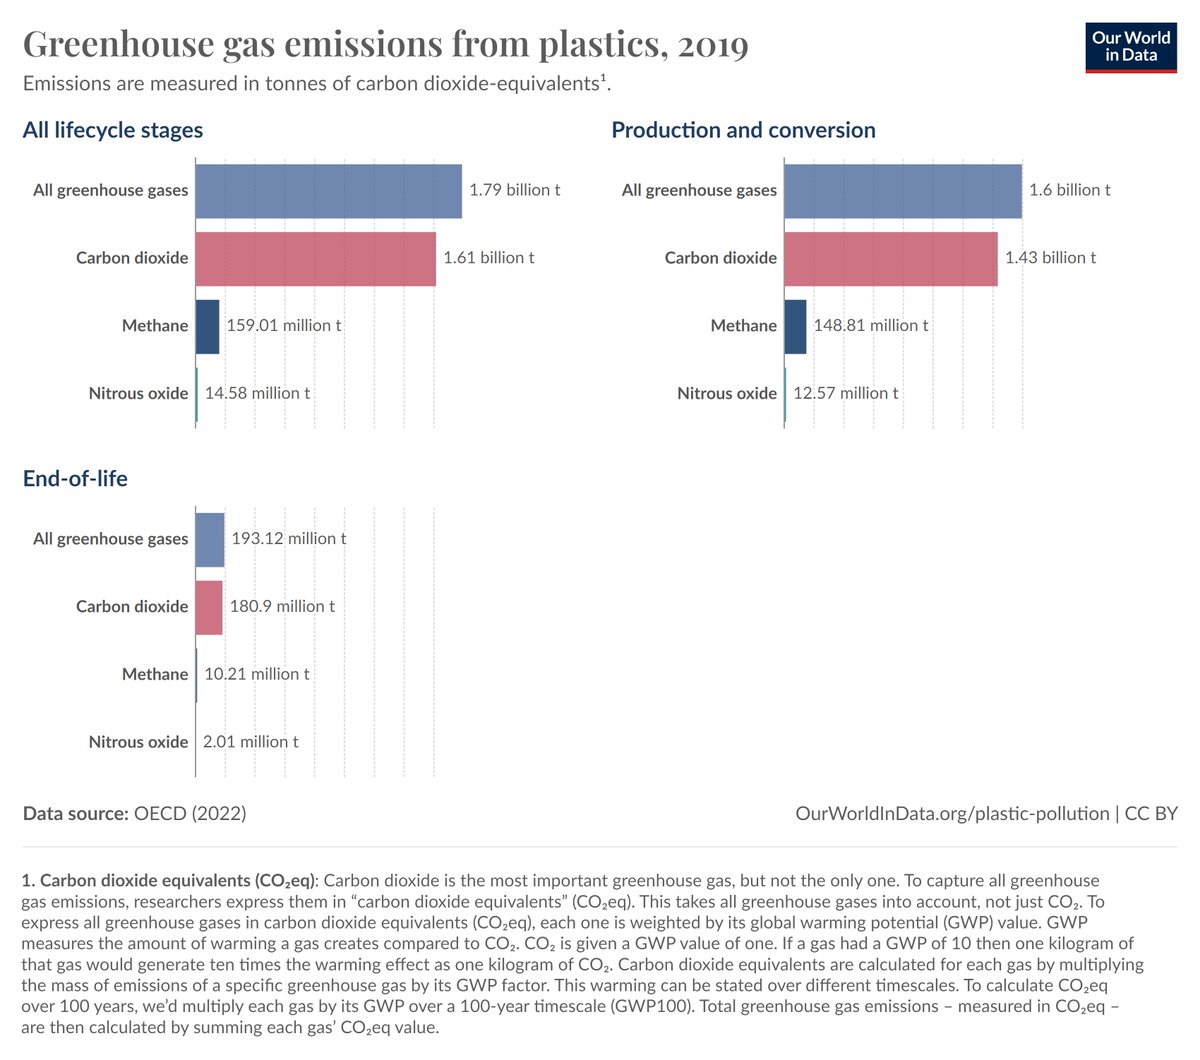 #EarthDay2024 theme is #PlanetvsPlastics. Here are some facts about plastic in this thread. The world emits around 54.6 billion tones of CO2eq, #plastics are responsible for around 3.3% of global emissions.